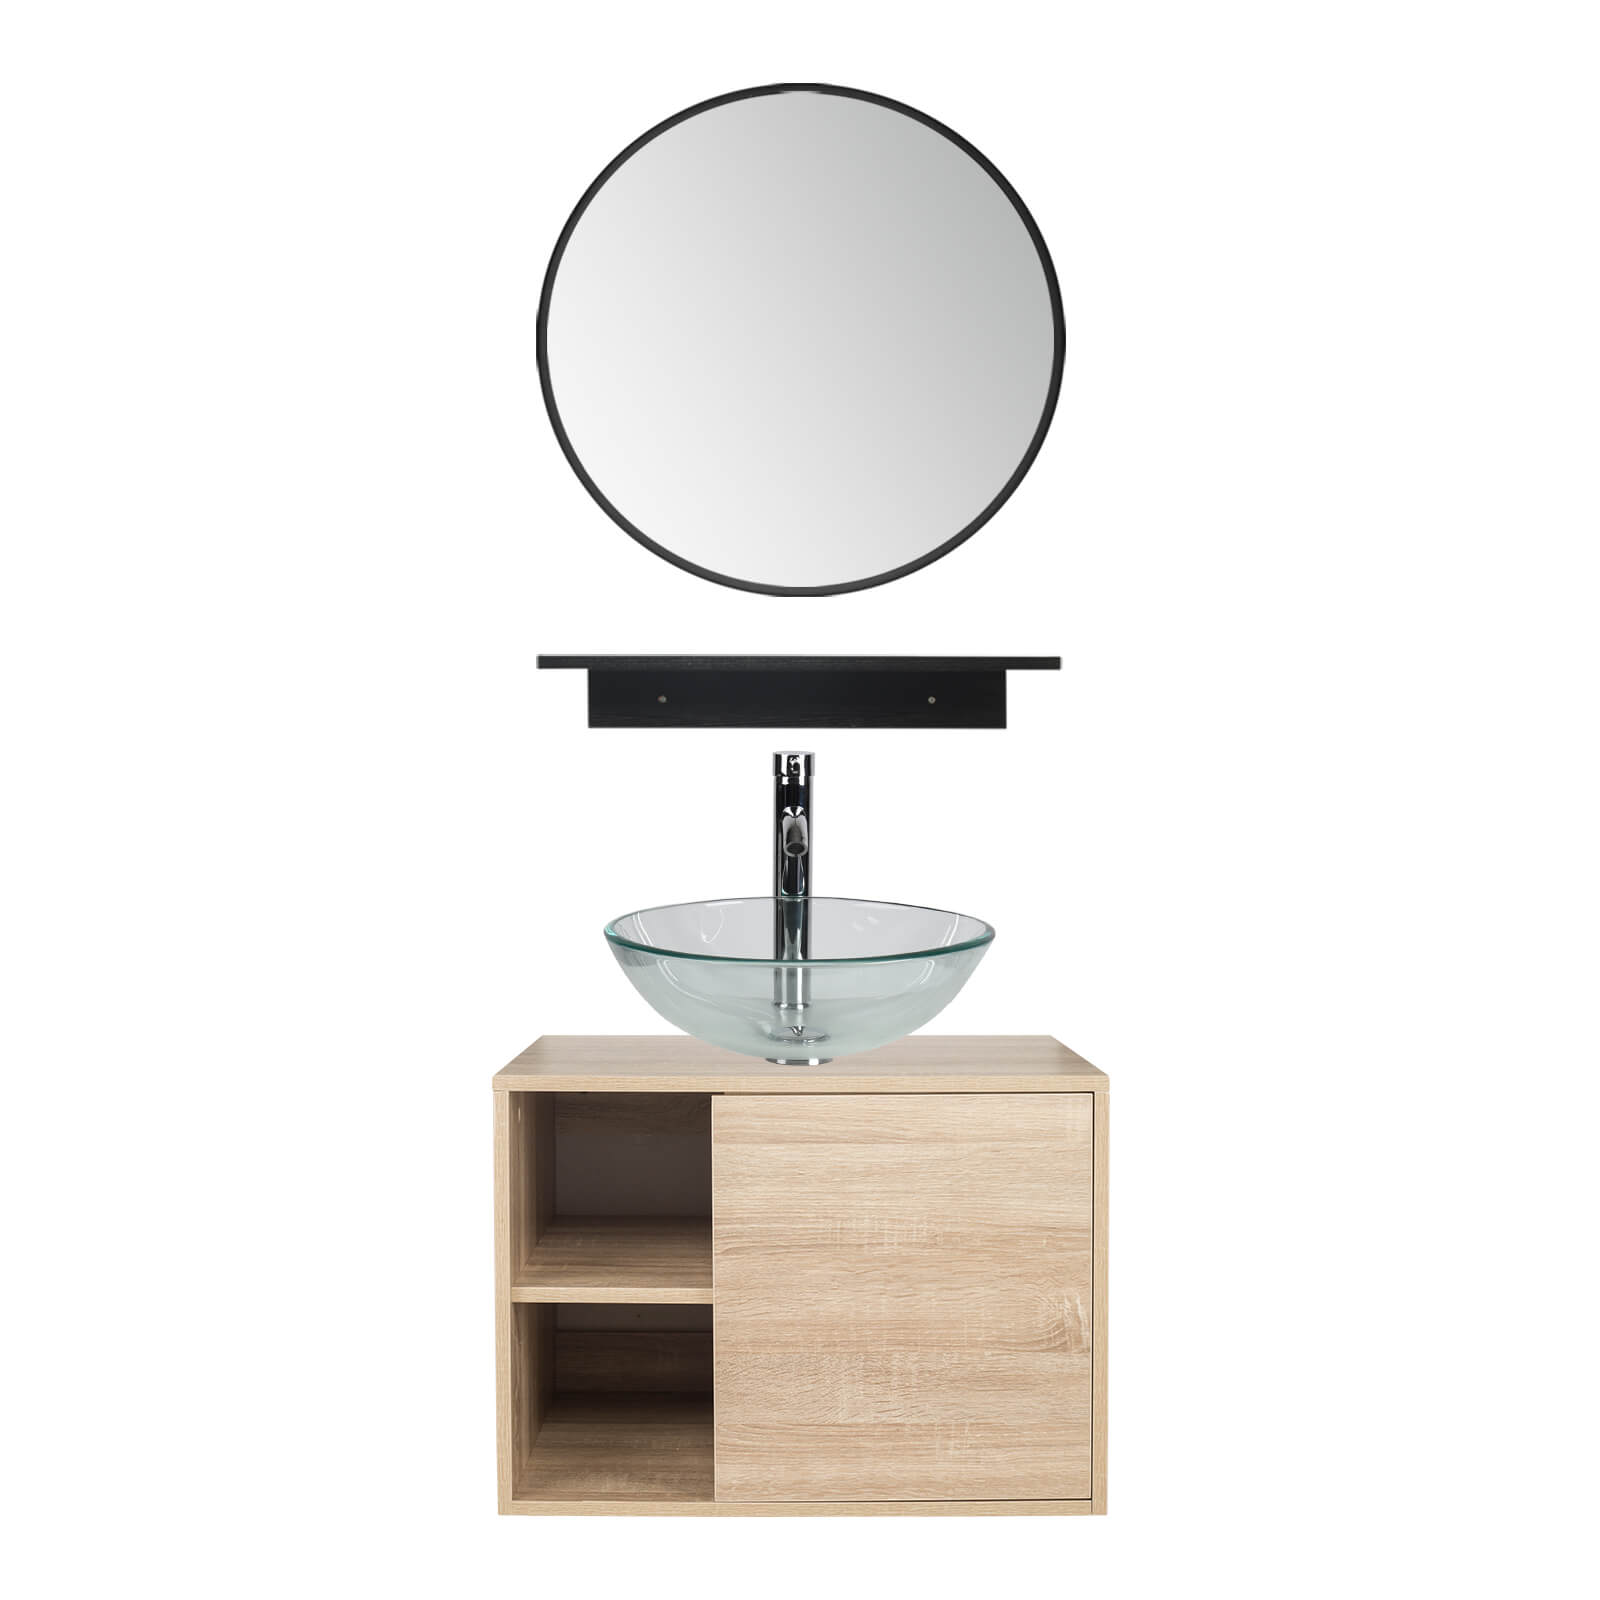 http://www.elecwish.com/cdn/shop/products/elecwish-vanity-with-round-clear-sink-bathroom-vanity-wall-mounted-cabinet-glass-sink-mirror-combo-us-bv1004-usba20061-38977206714591.jpg?v=1669816959